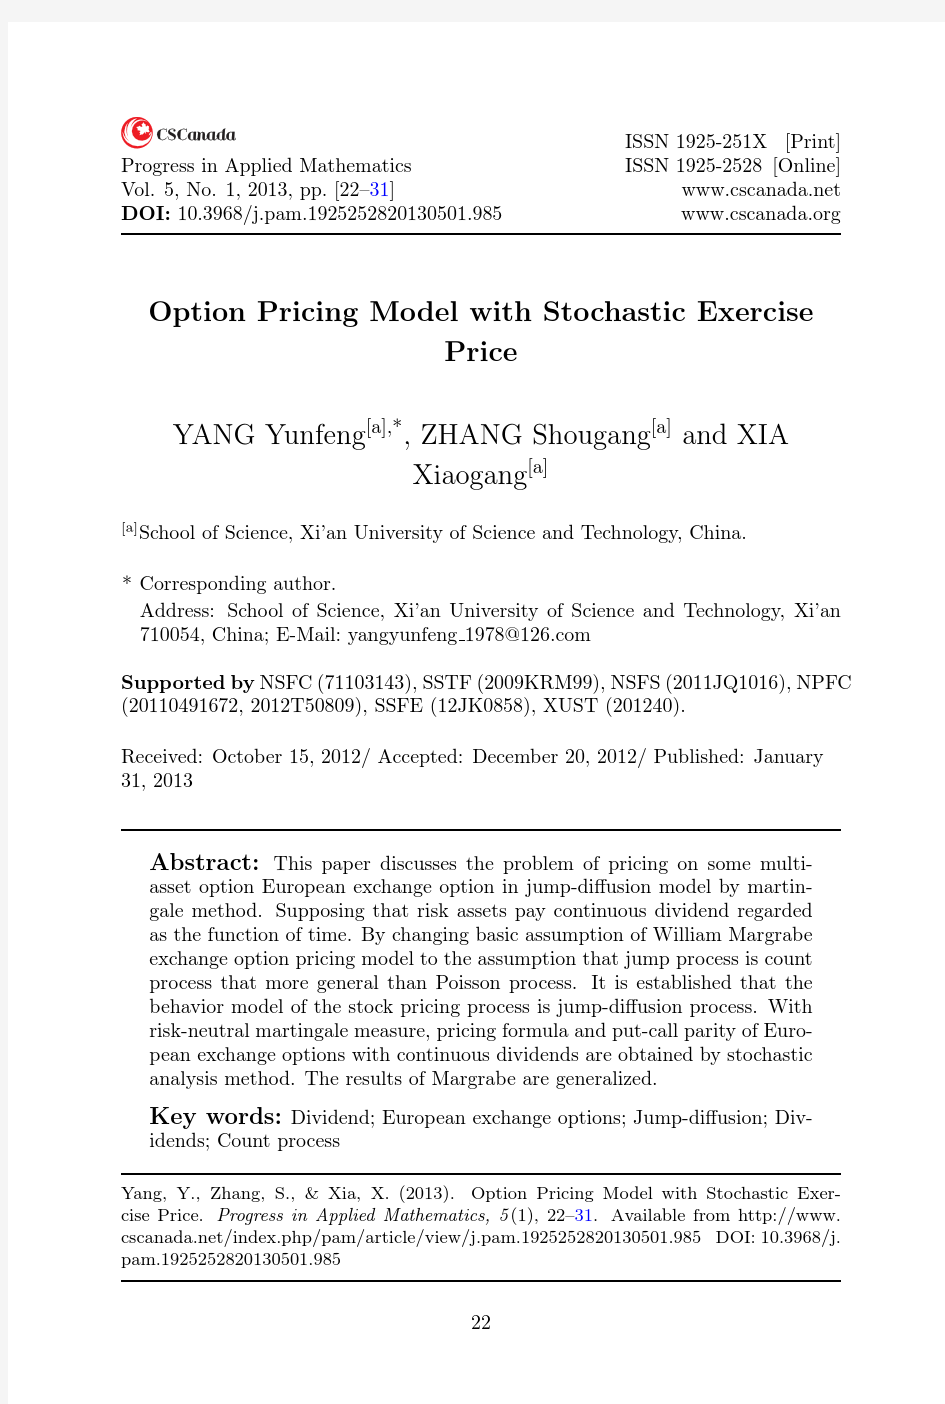 Option Pricing Model with Stochastic Exercise Price